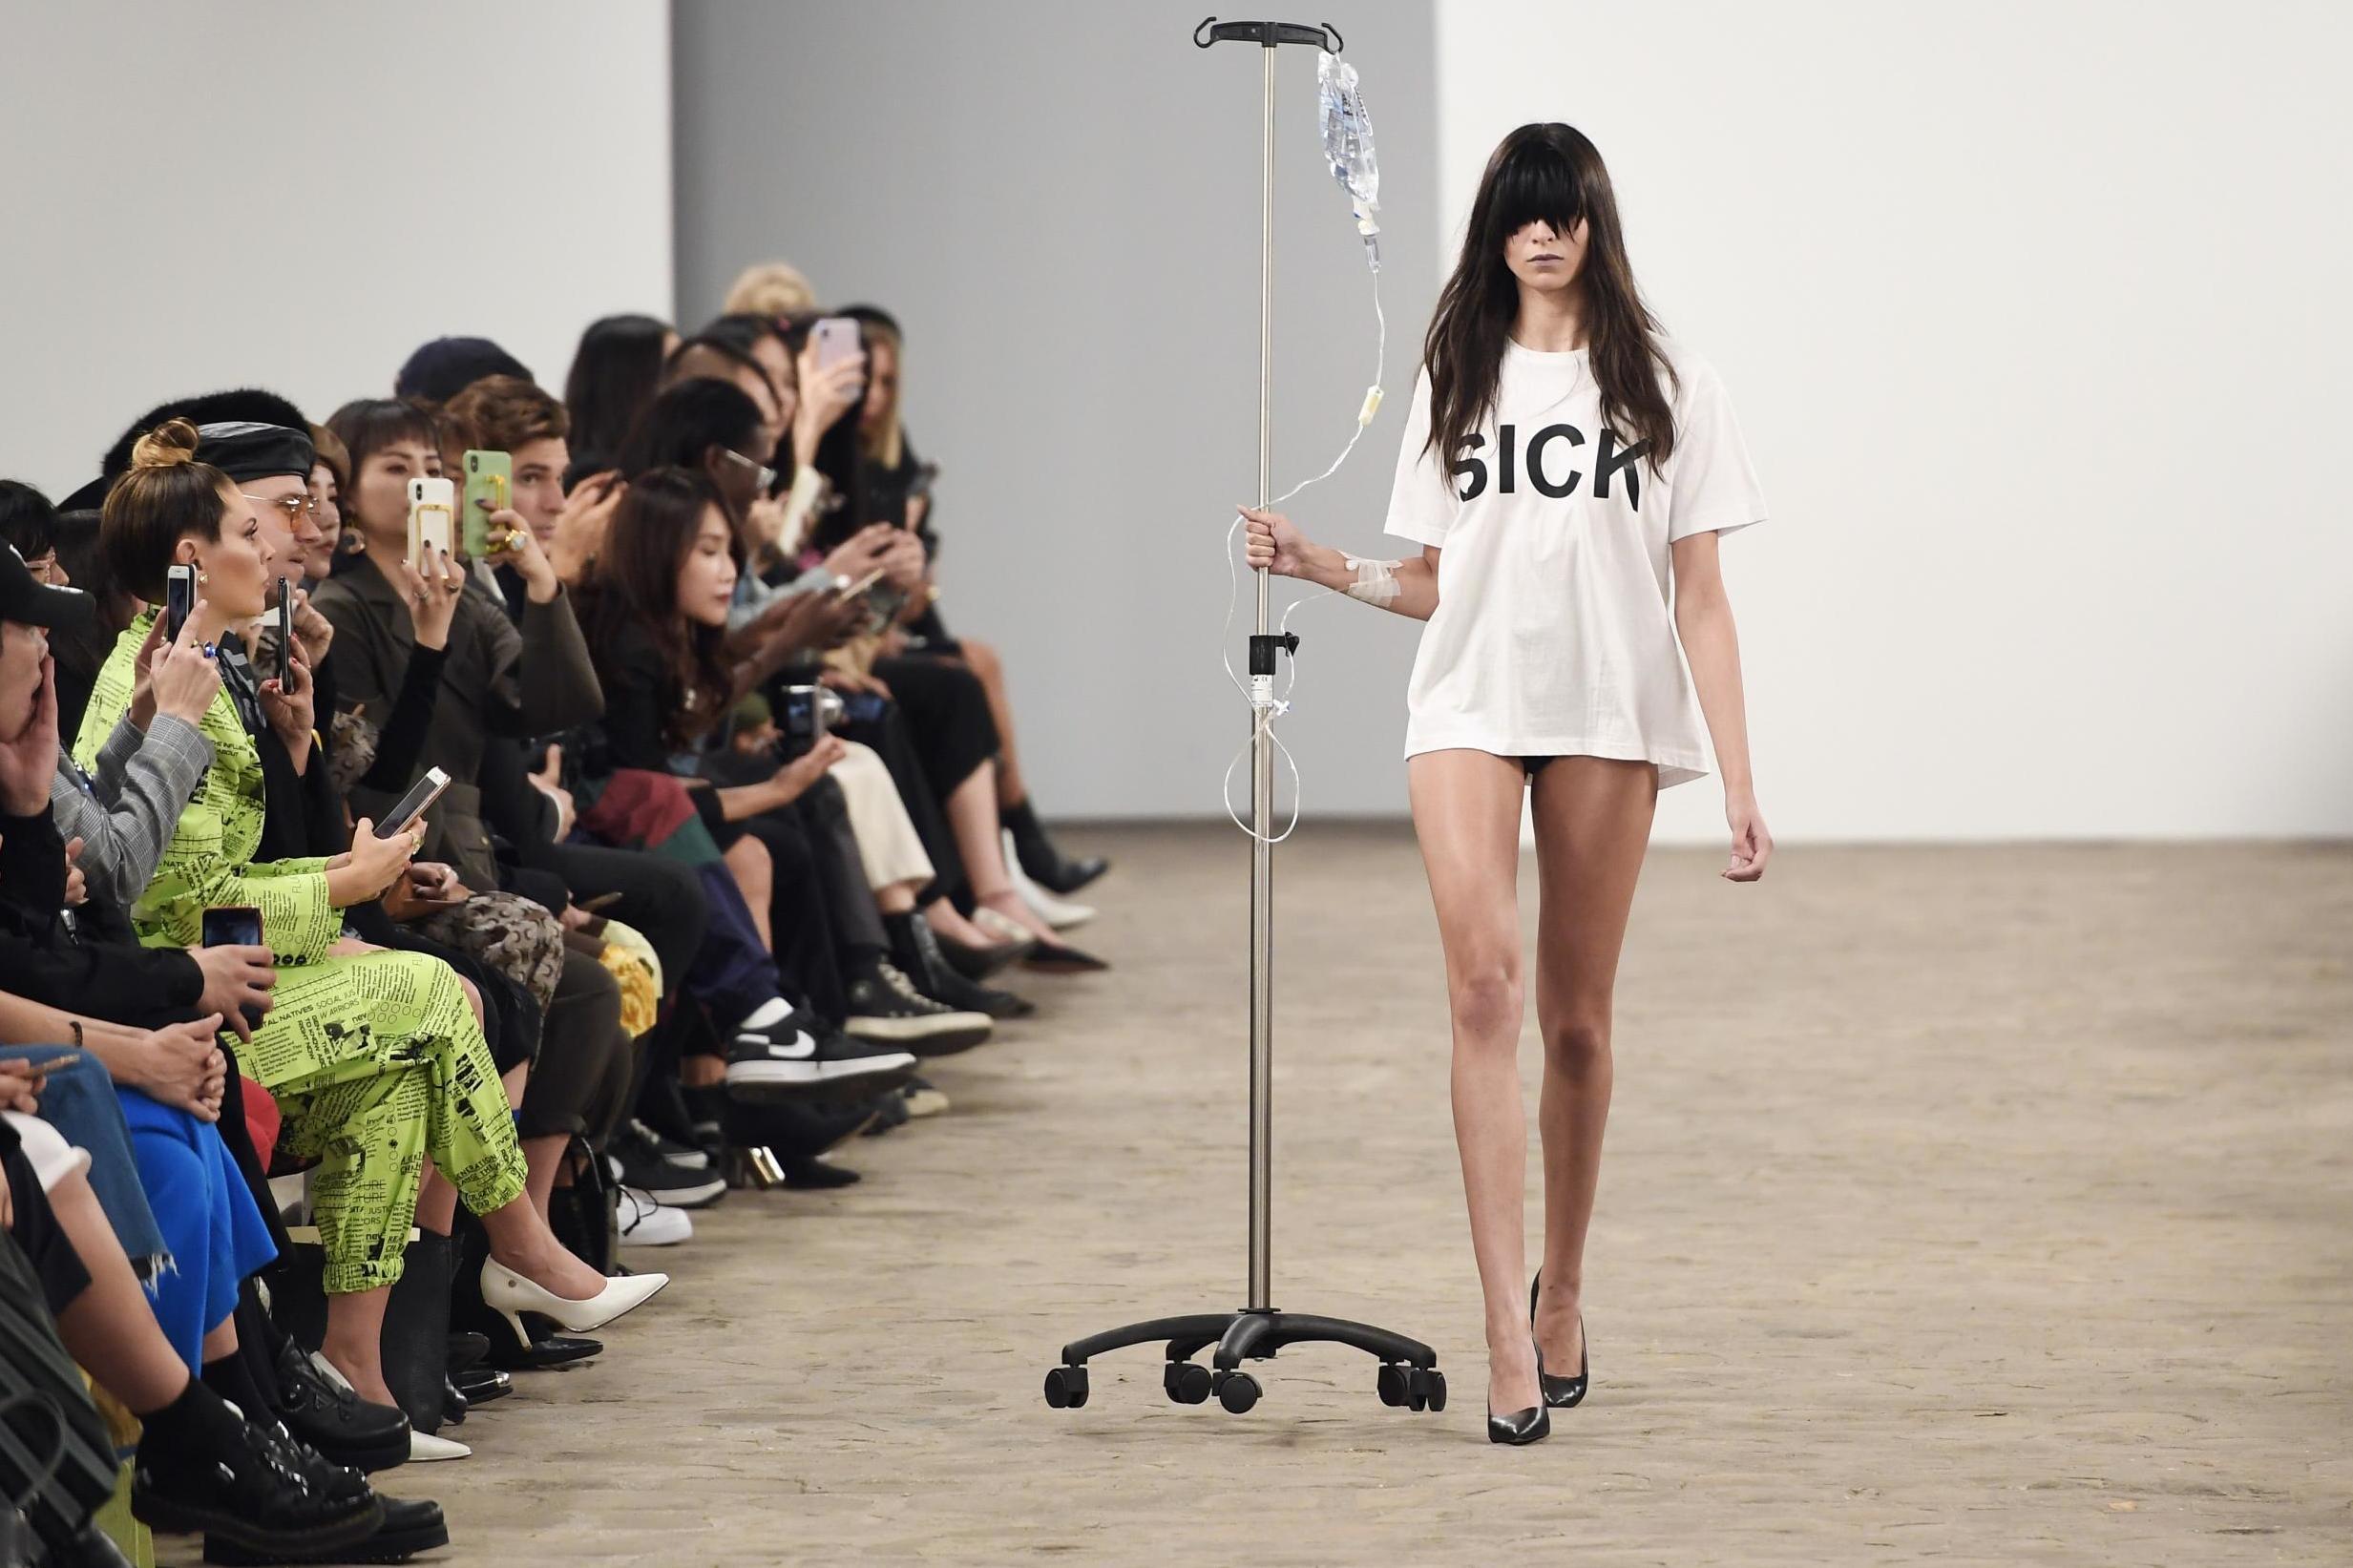 Kimhēkim: Fashion brand criticised for using IV drips in runway show